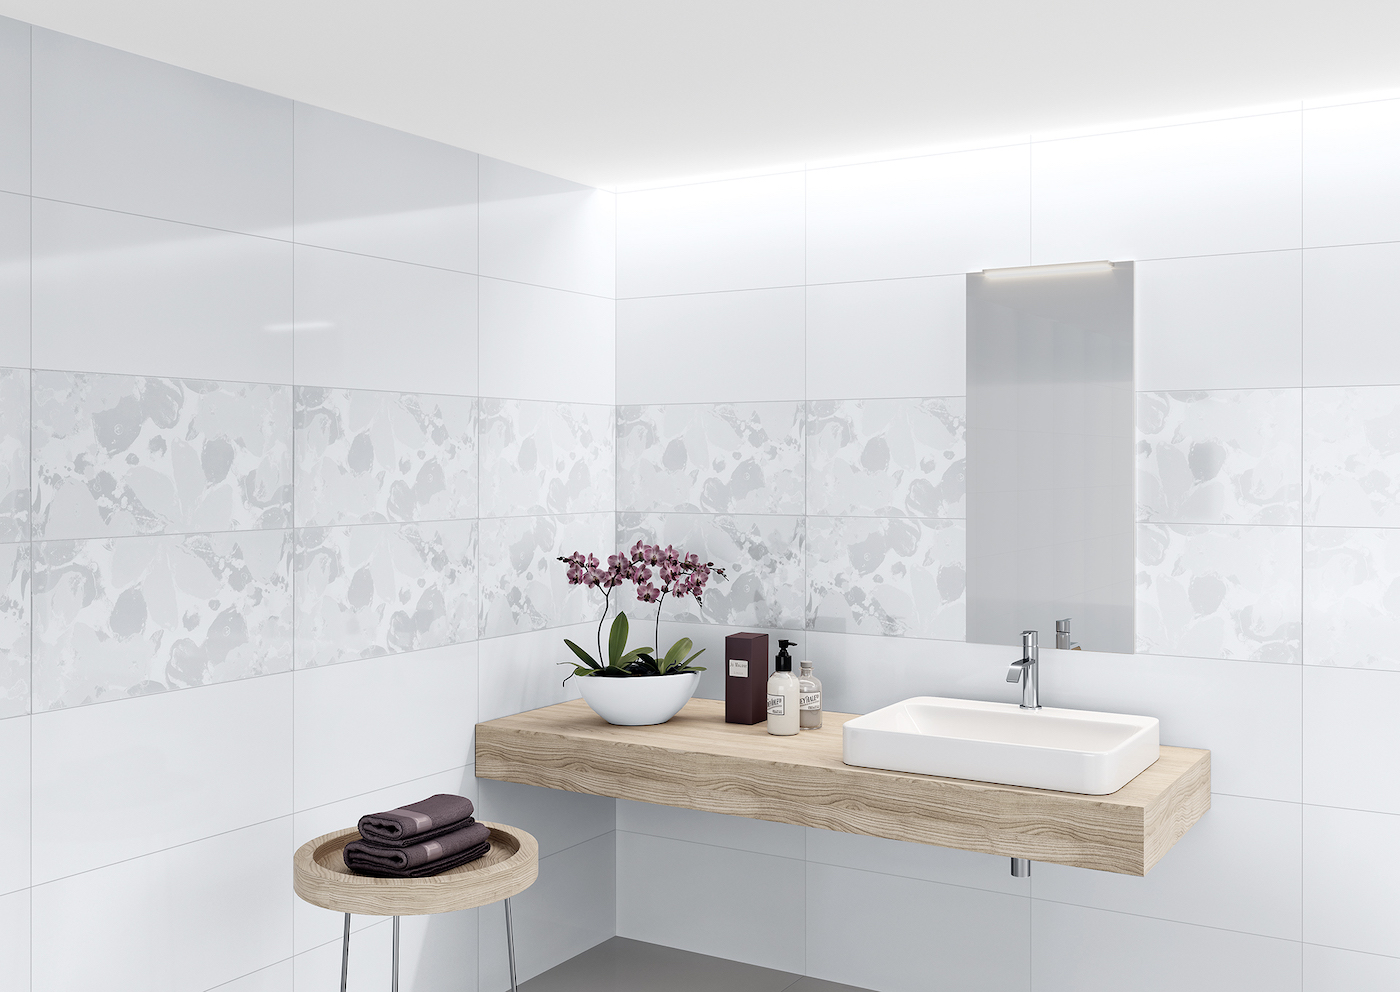 Pure White Y30600001 white glossy 30x60 wall tile, Y30601001 Belle white glossy 30x60 decor